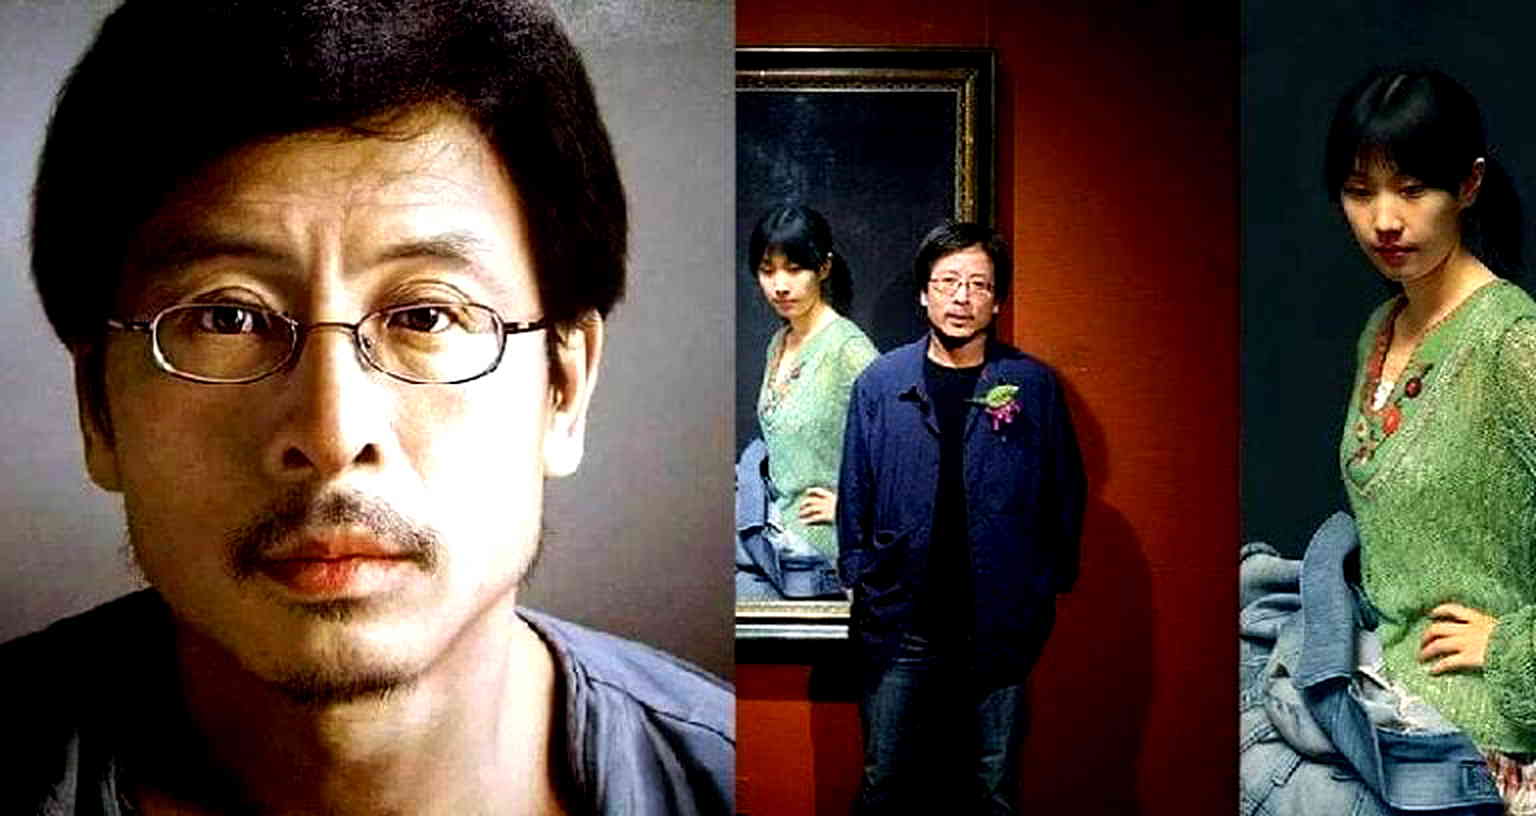 Chinese Hyperrealist Artist Awarded an Honorary Doctorate From Birmingham City University